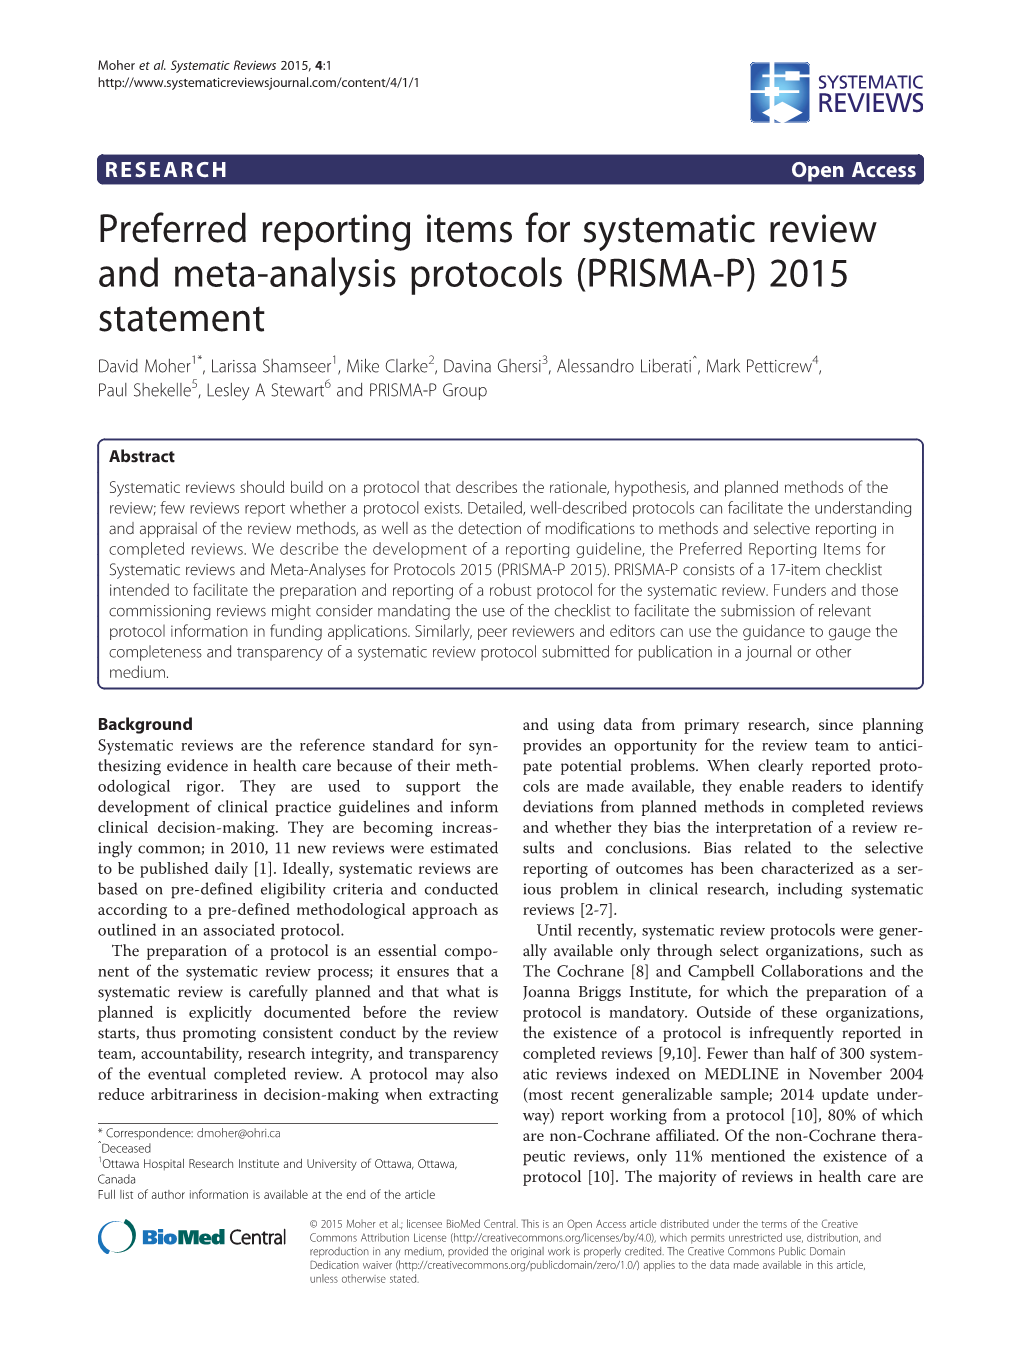 Preferred Reporting Items for Systematic